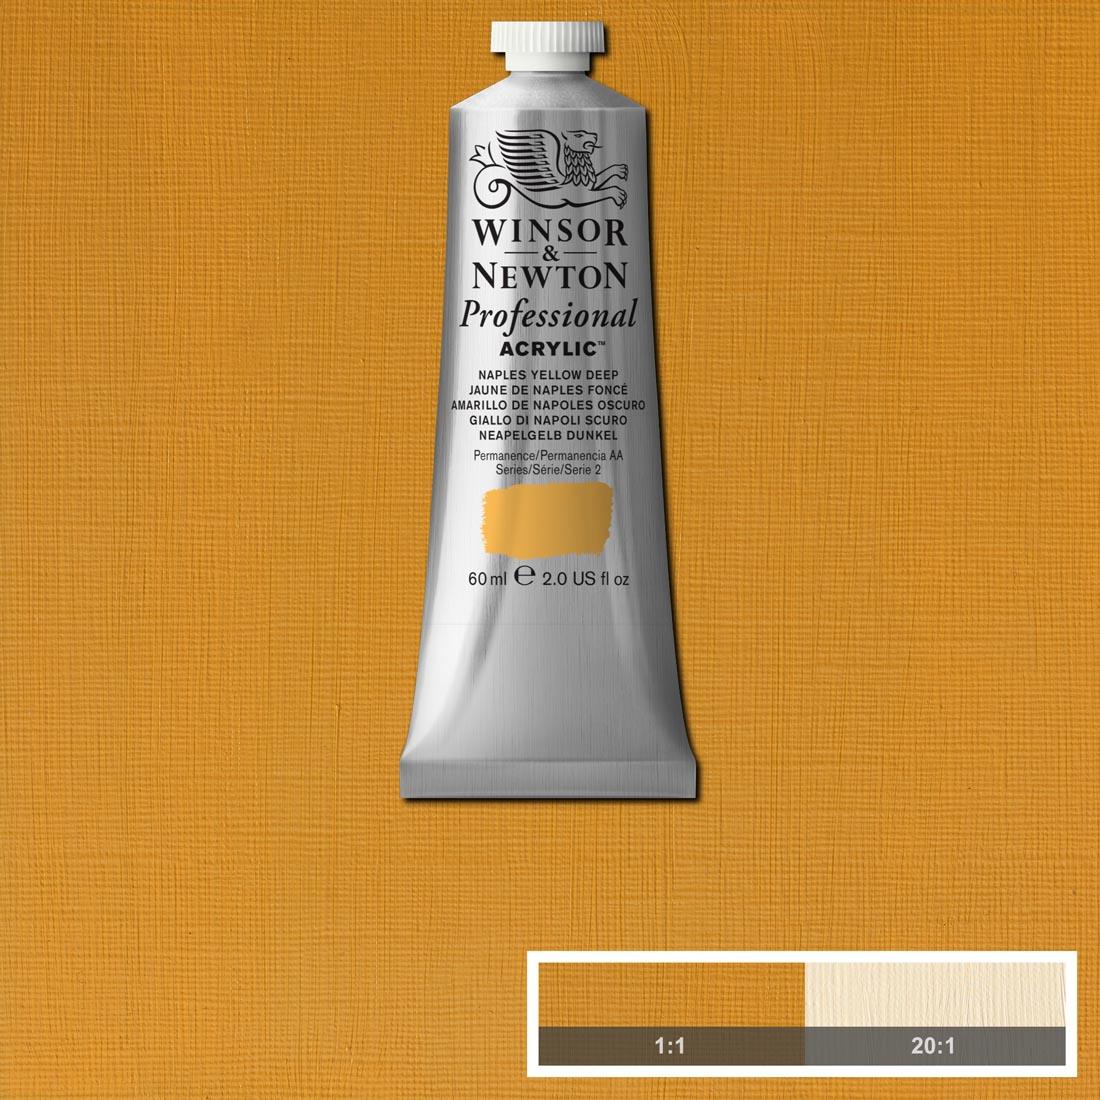 Tube of Naples Yellow Deep Winsor and Newton Professional Acrylic with paint swatch in the background